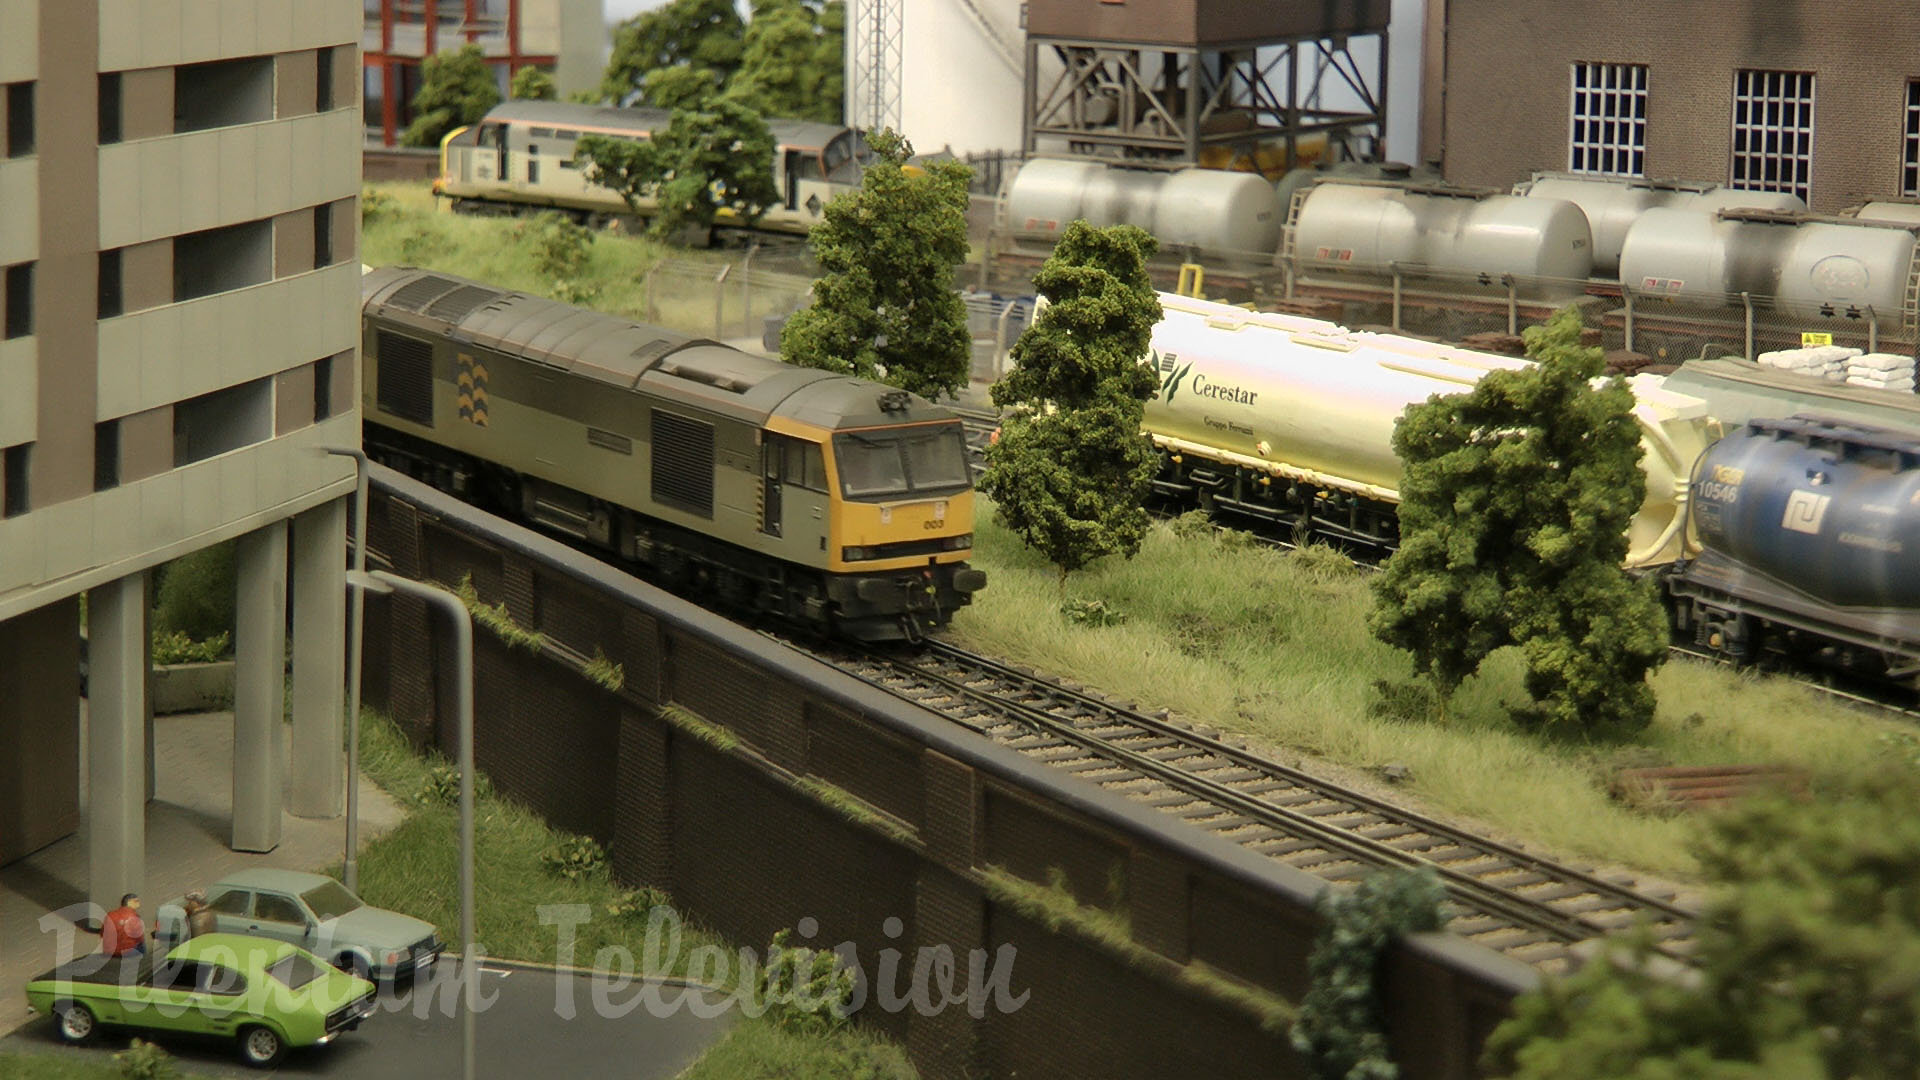 British railway modelling and excellently weathered trains on Farkham’s model railroad layout